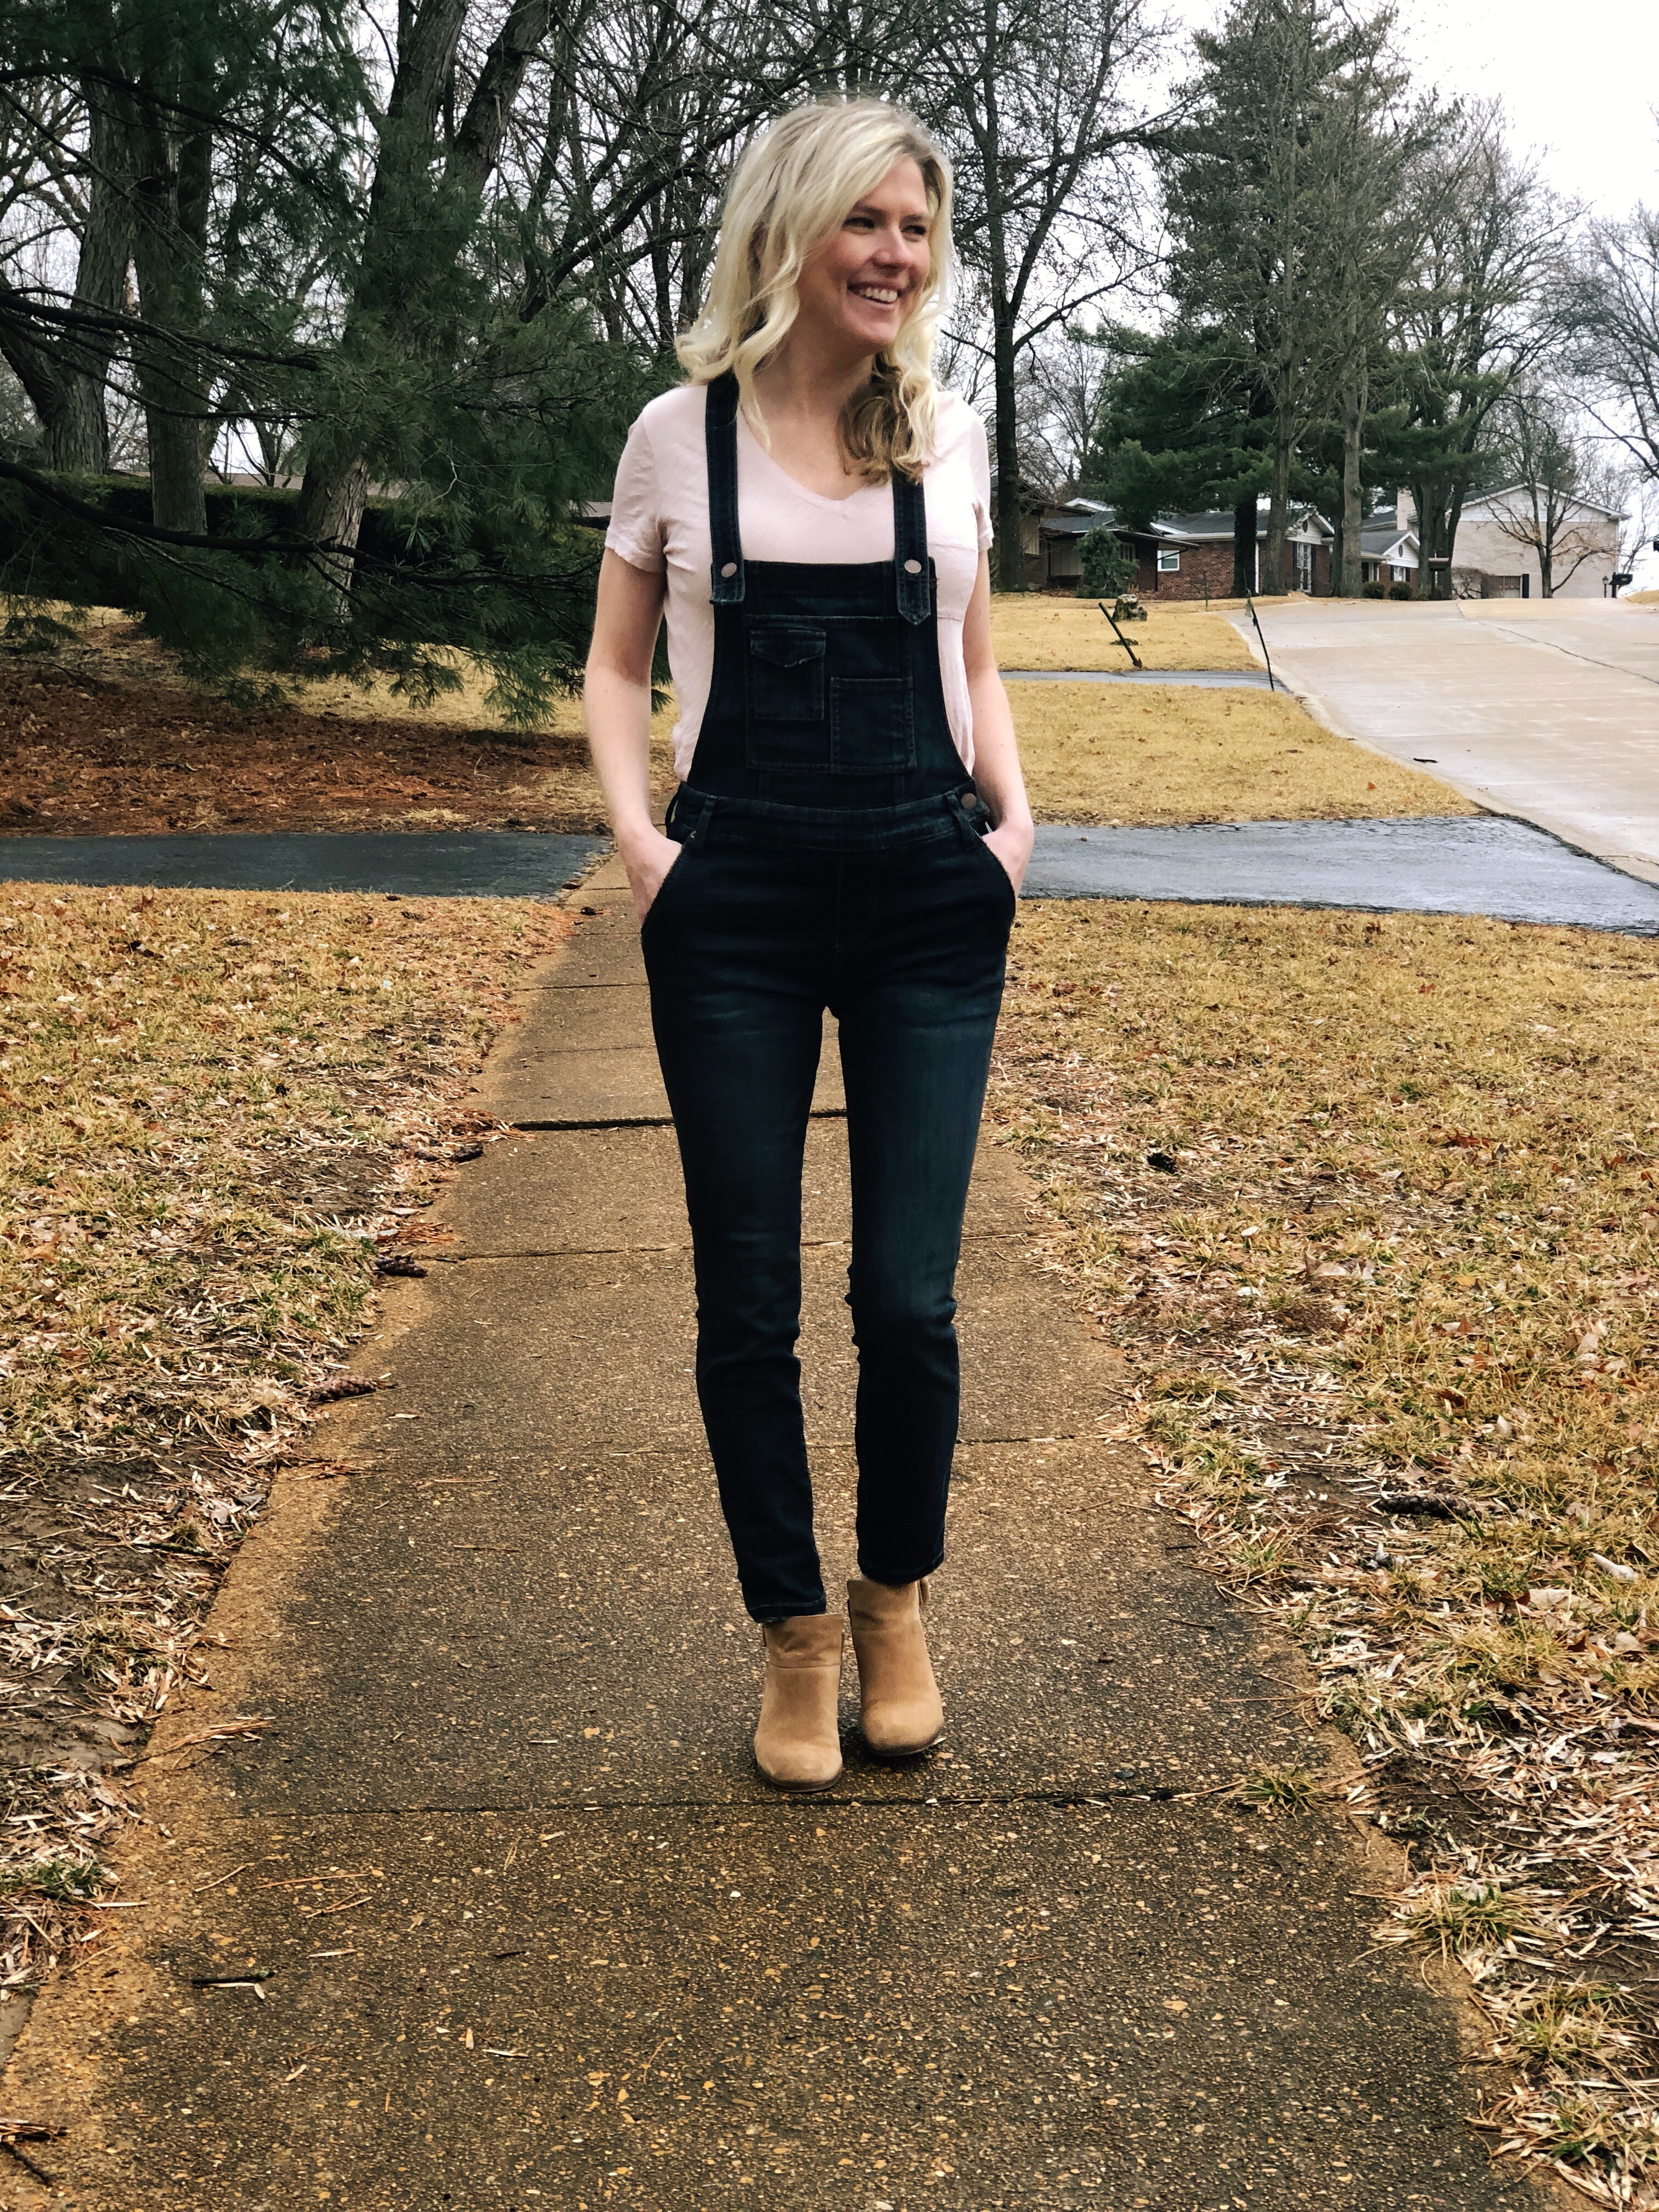 plain t-shirt and denim overalls | How to style Free People Overalls featured by top Missouri fashion blogger, Emmy Lou Styles: with a plain tshirt